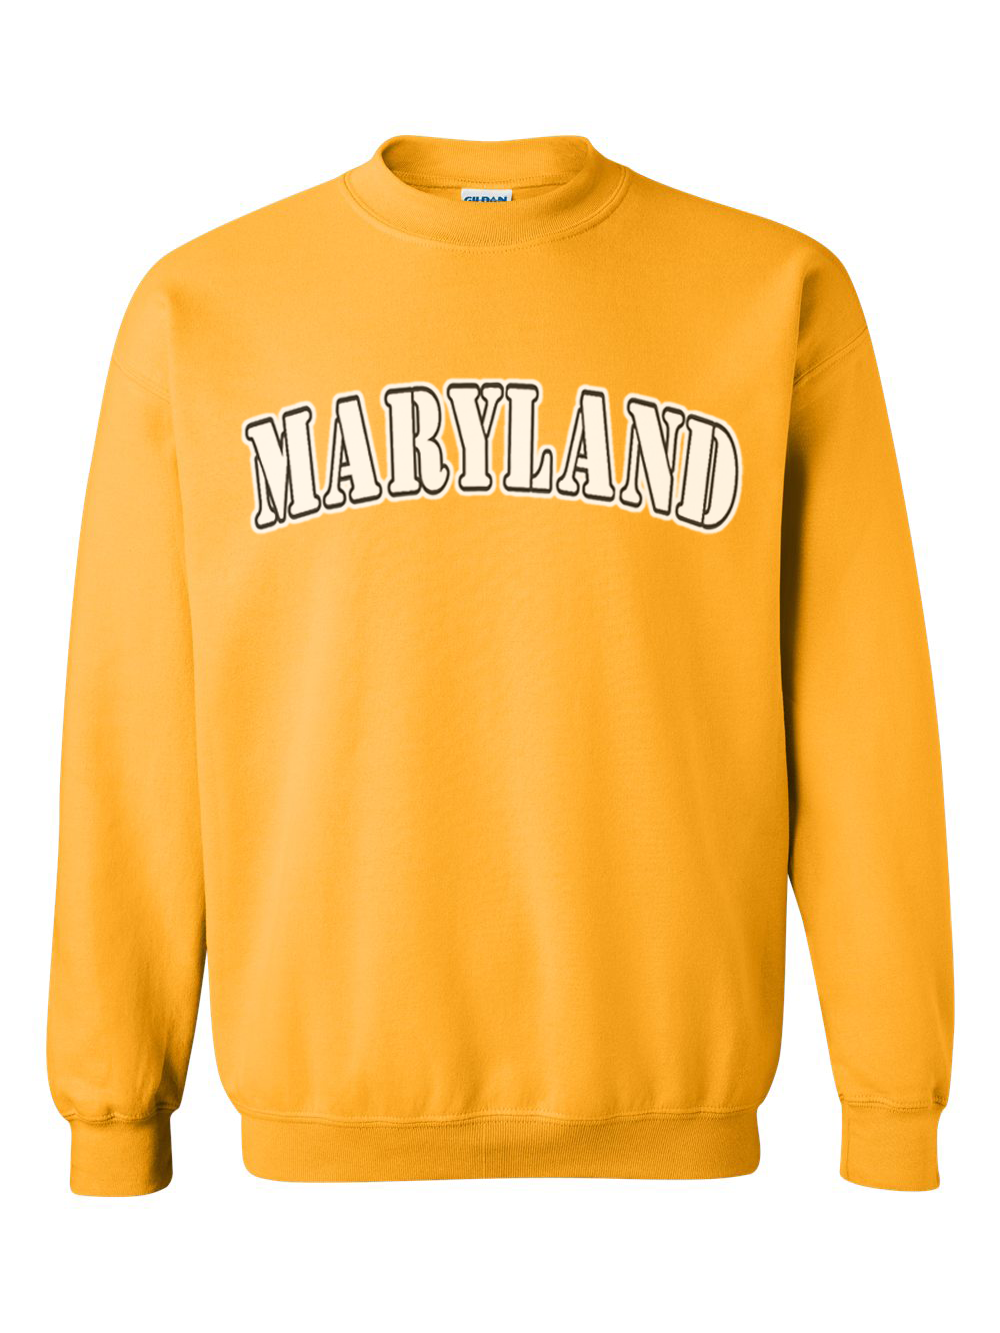 Maryland Gifts White Plain Text Crewneck Sweater (Gold)